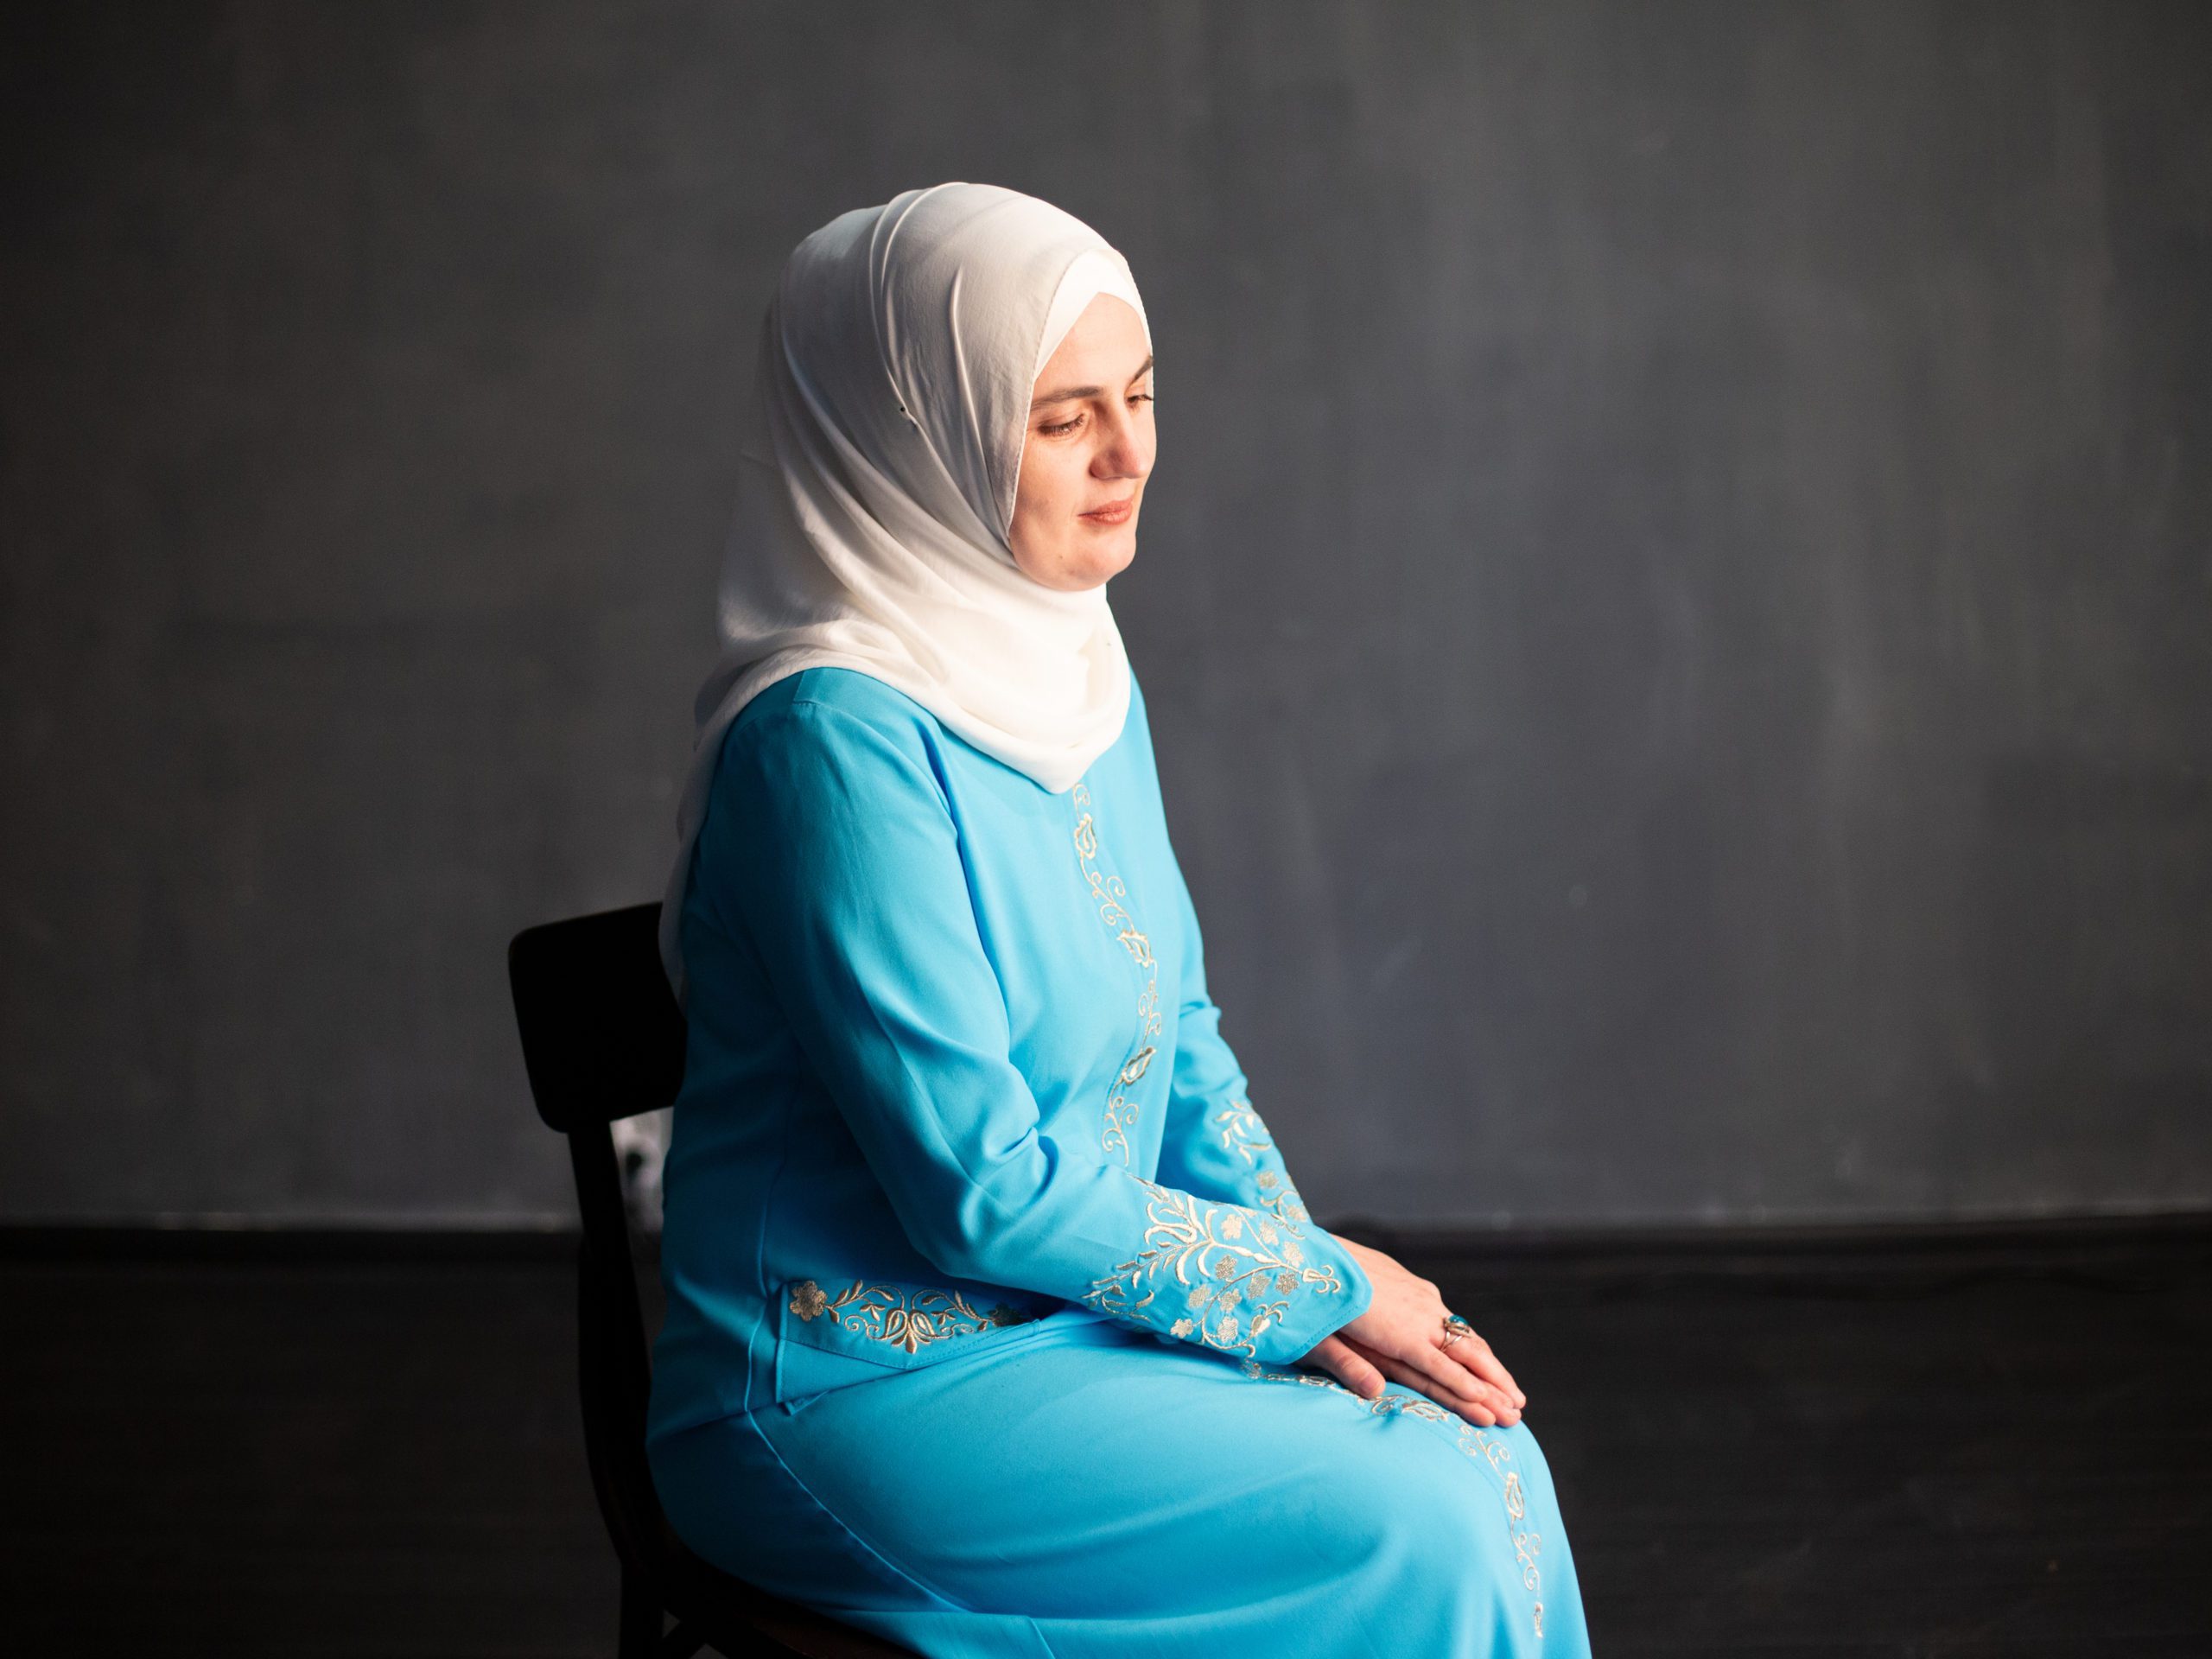 Since her husband's arrest, Mumine Saliyevat has worked to help the children left behind by similar detentions